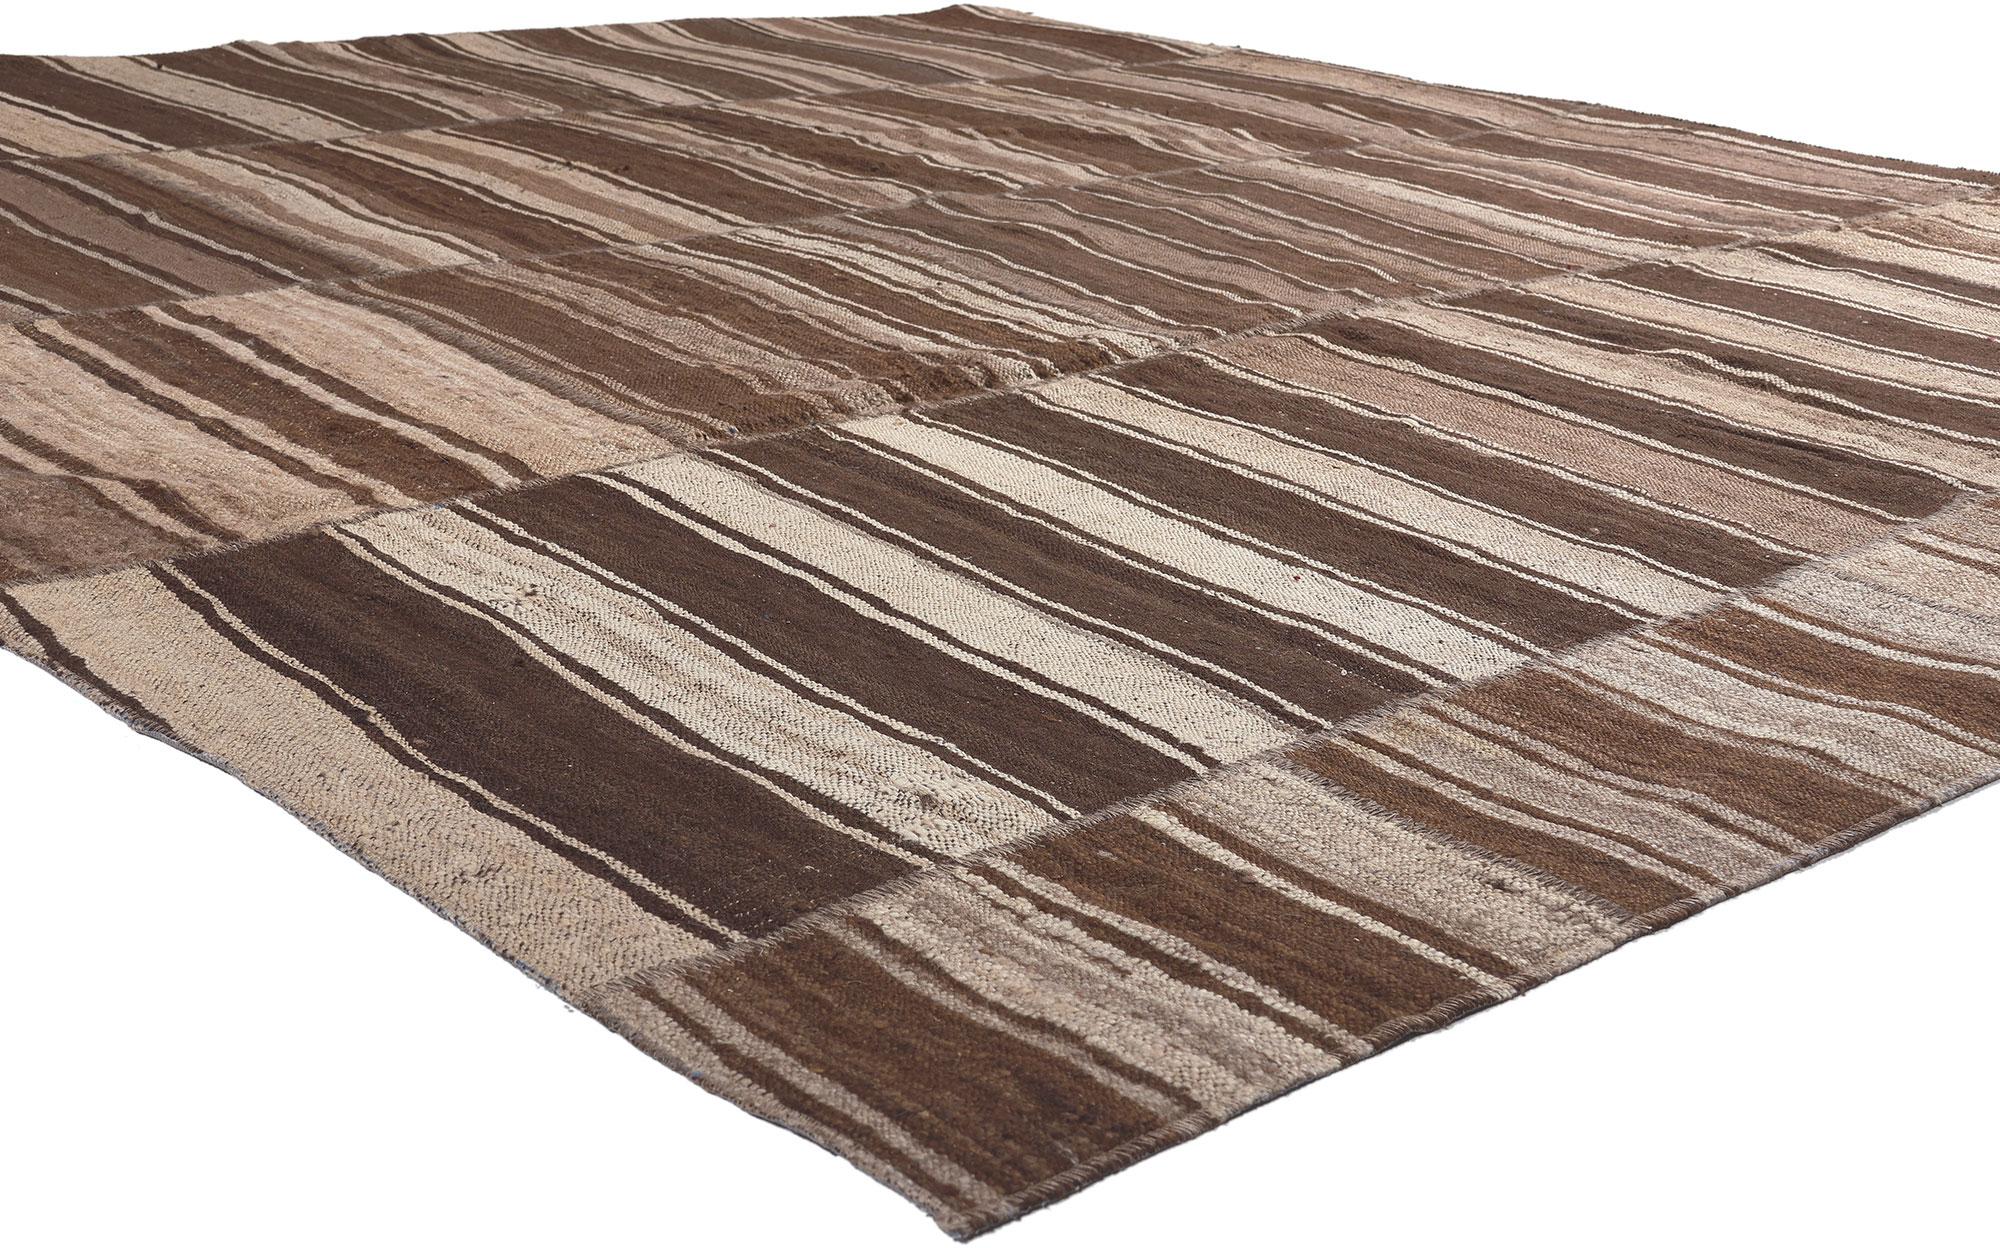 60634 Brown Vintage Striped Turkish Kilim Rug, 09'06 x 09'01. This handwoven wool vintage Turkish kilim rug embodies the spirit of Wabi-Sabi, seamlessly merging with a commitment to sustainable design to create a masterpiece that effortlessly